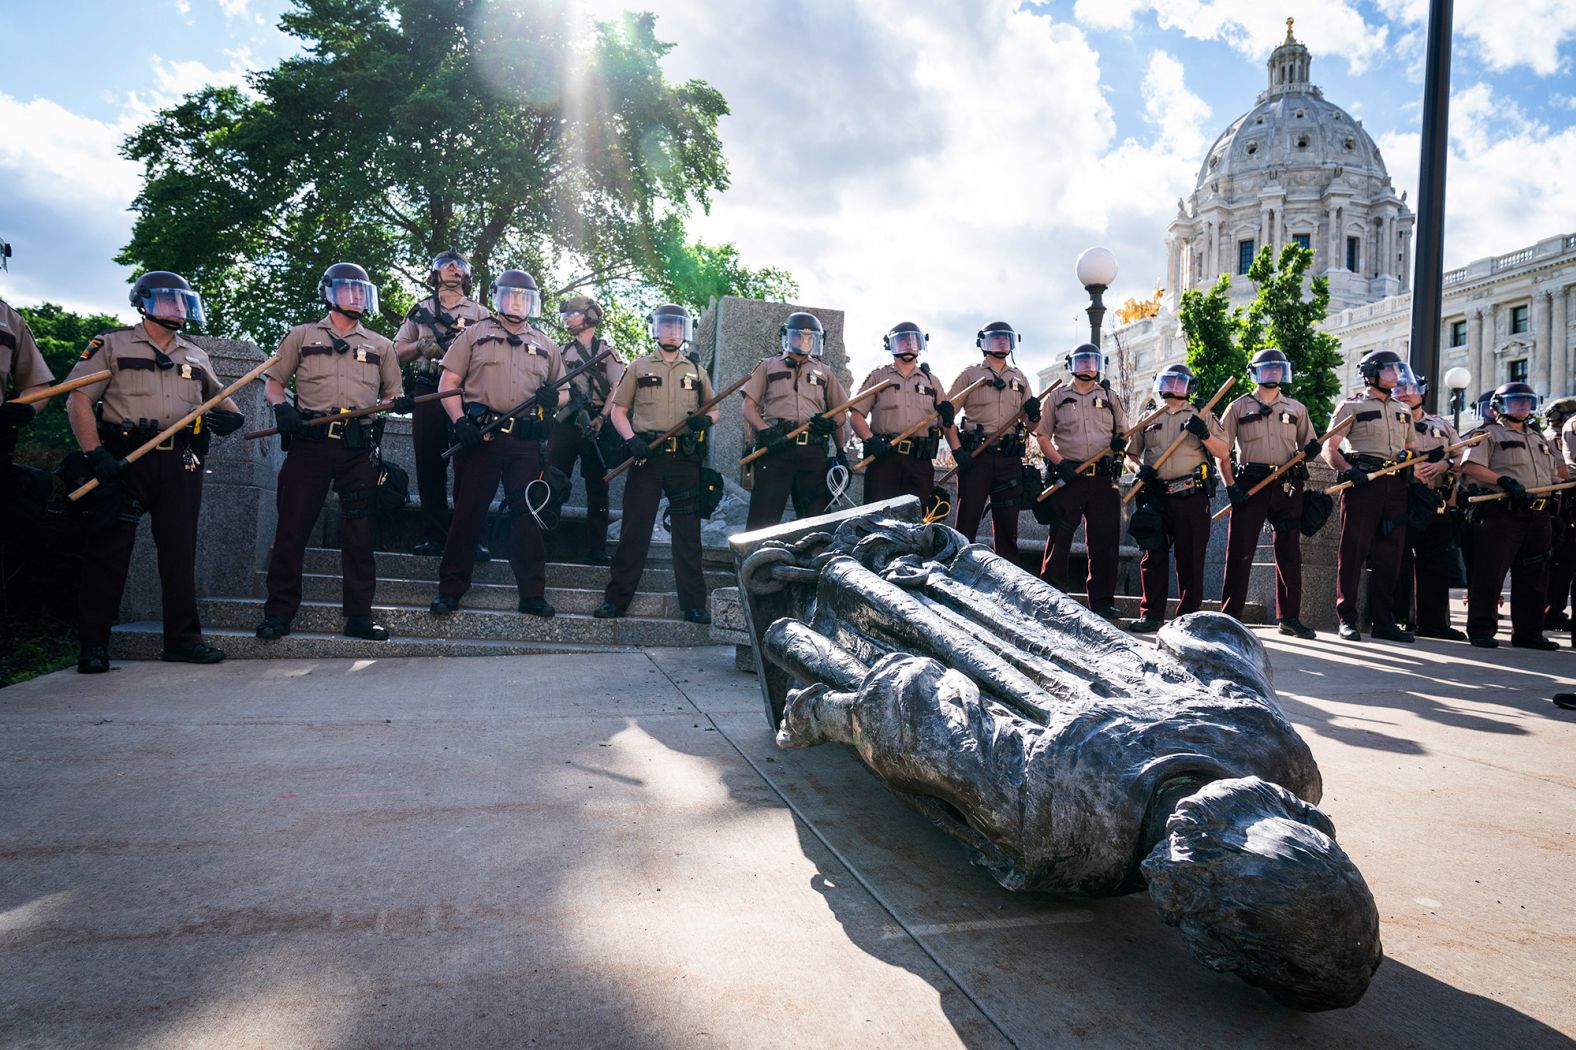 Minnesota state troopers surround a statue of Christopher Columbus after activists pulled it down in front of the Capitol in St. Paul on June 10. <a href="index.php?page=&url=https%3A%2F%2Fwww.cnn.com%2F2020%2F06%2F10%2Fus%2Fchristopher-columbus-statues-down-trnd%2Findex.html" target="_blank">Columbus has long been a contentious figure in history</a> for his treatment of the Indigenous communities he encountered and for his role in the violent colonization at their expense. 